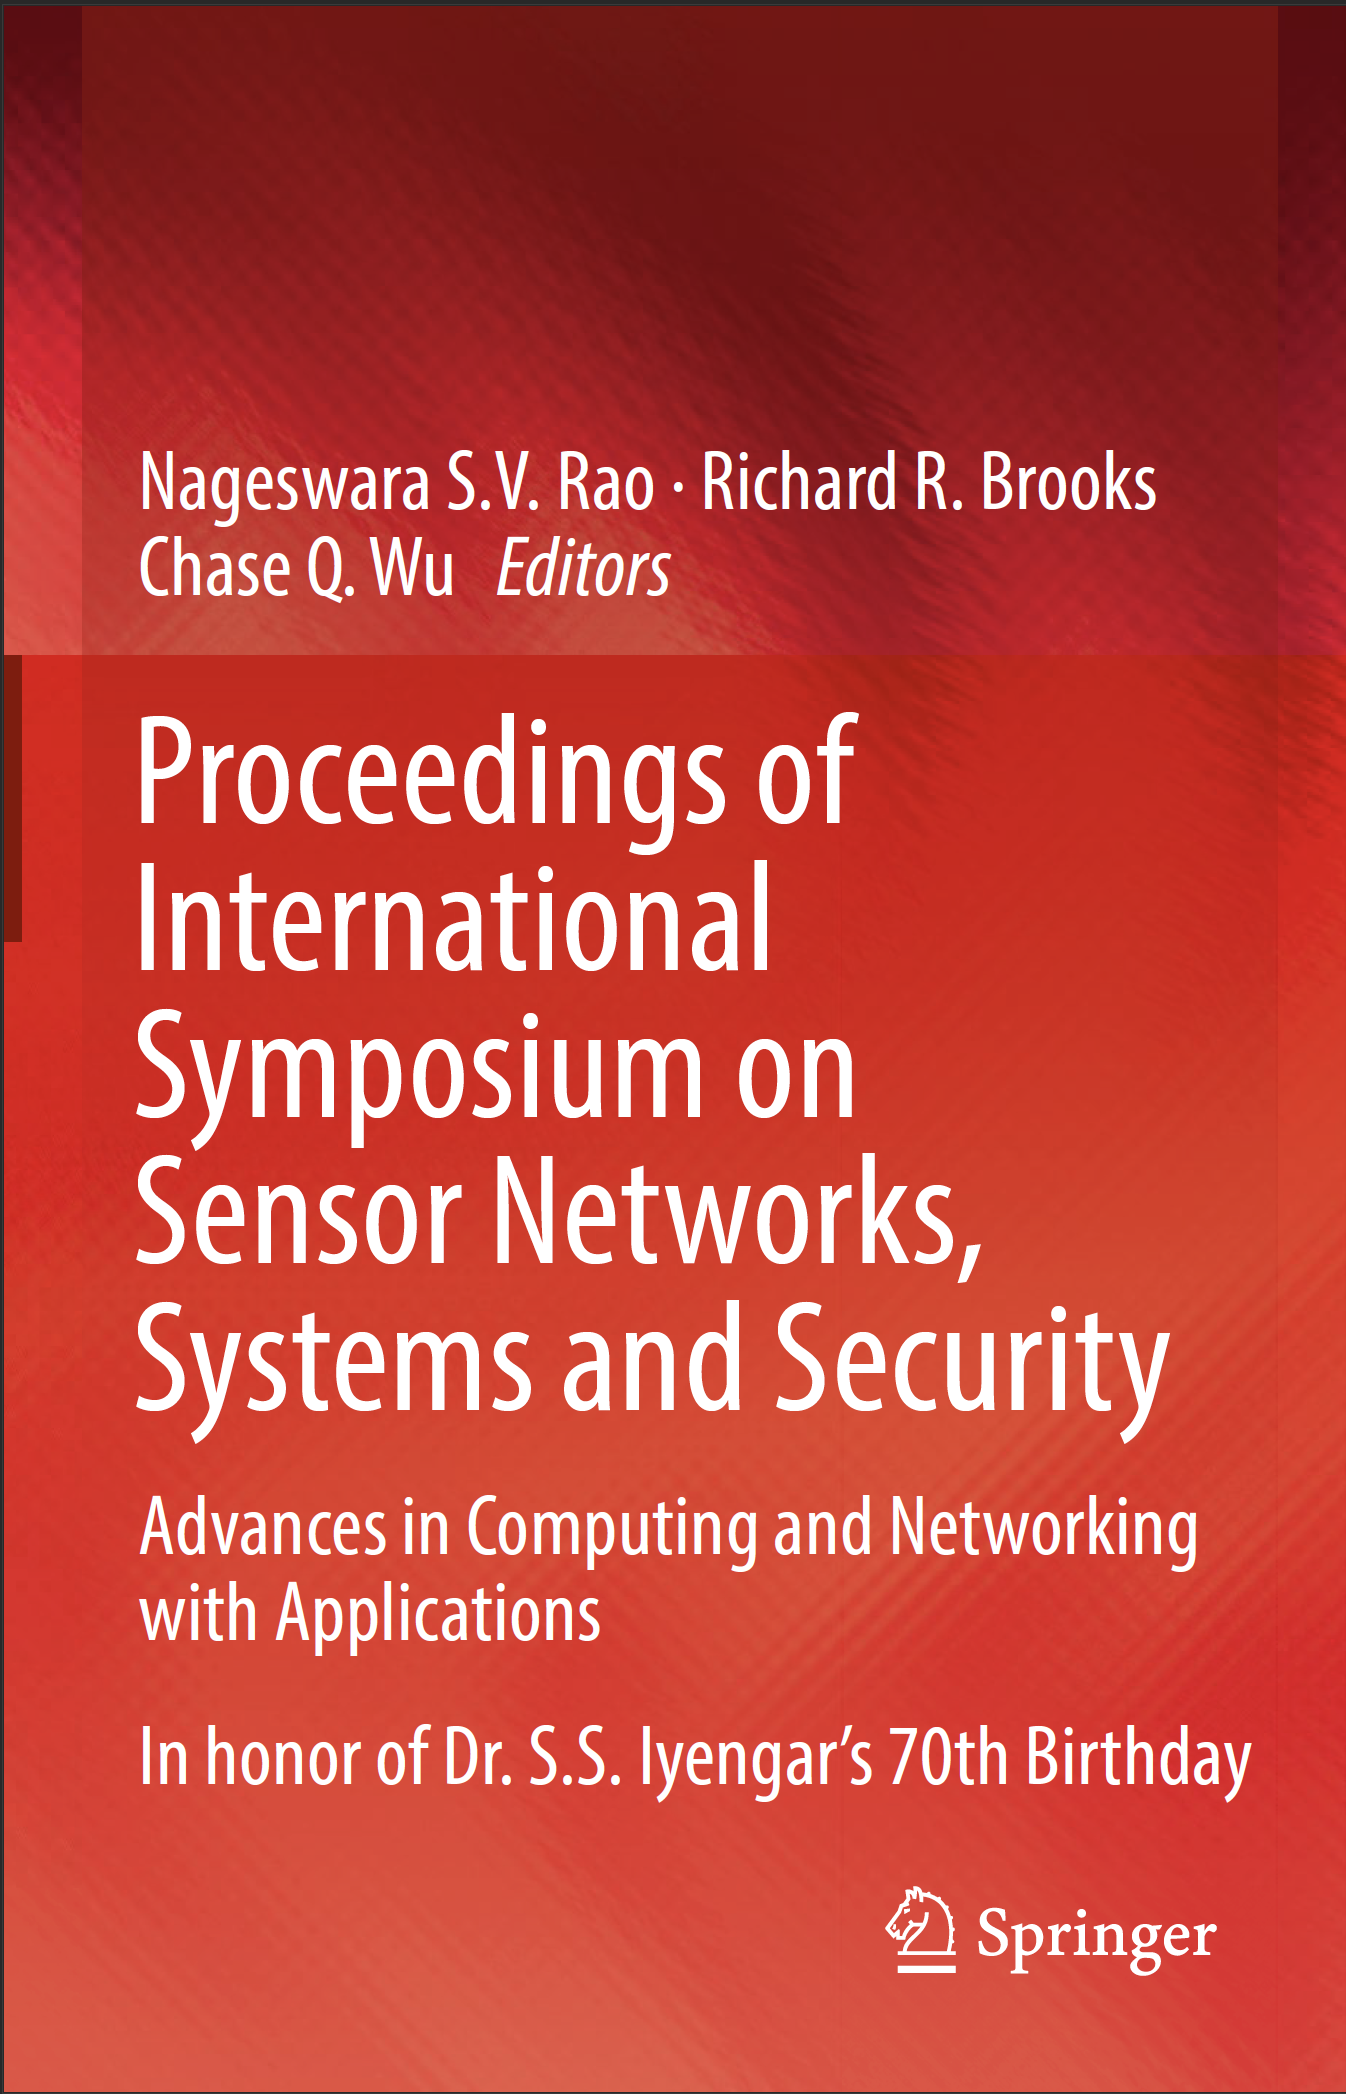 Image cover of Proceedings of International Symposium on Sensor Networks, Systems and Security